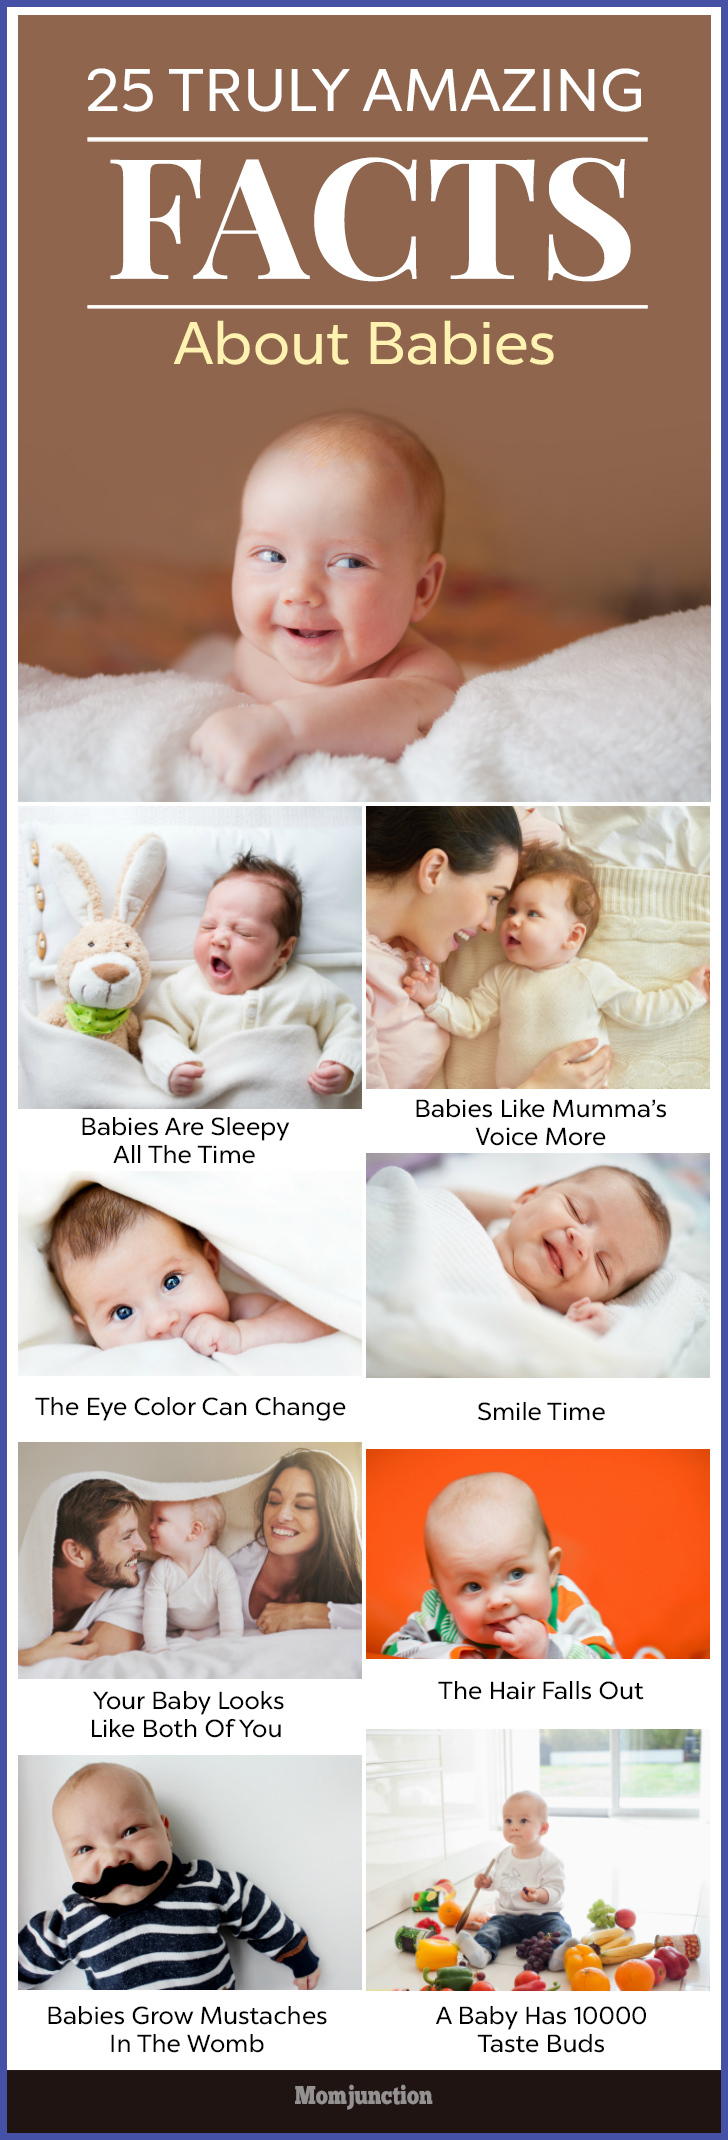 What determines a baby's eye color?